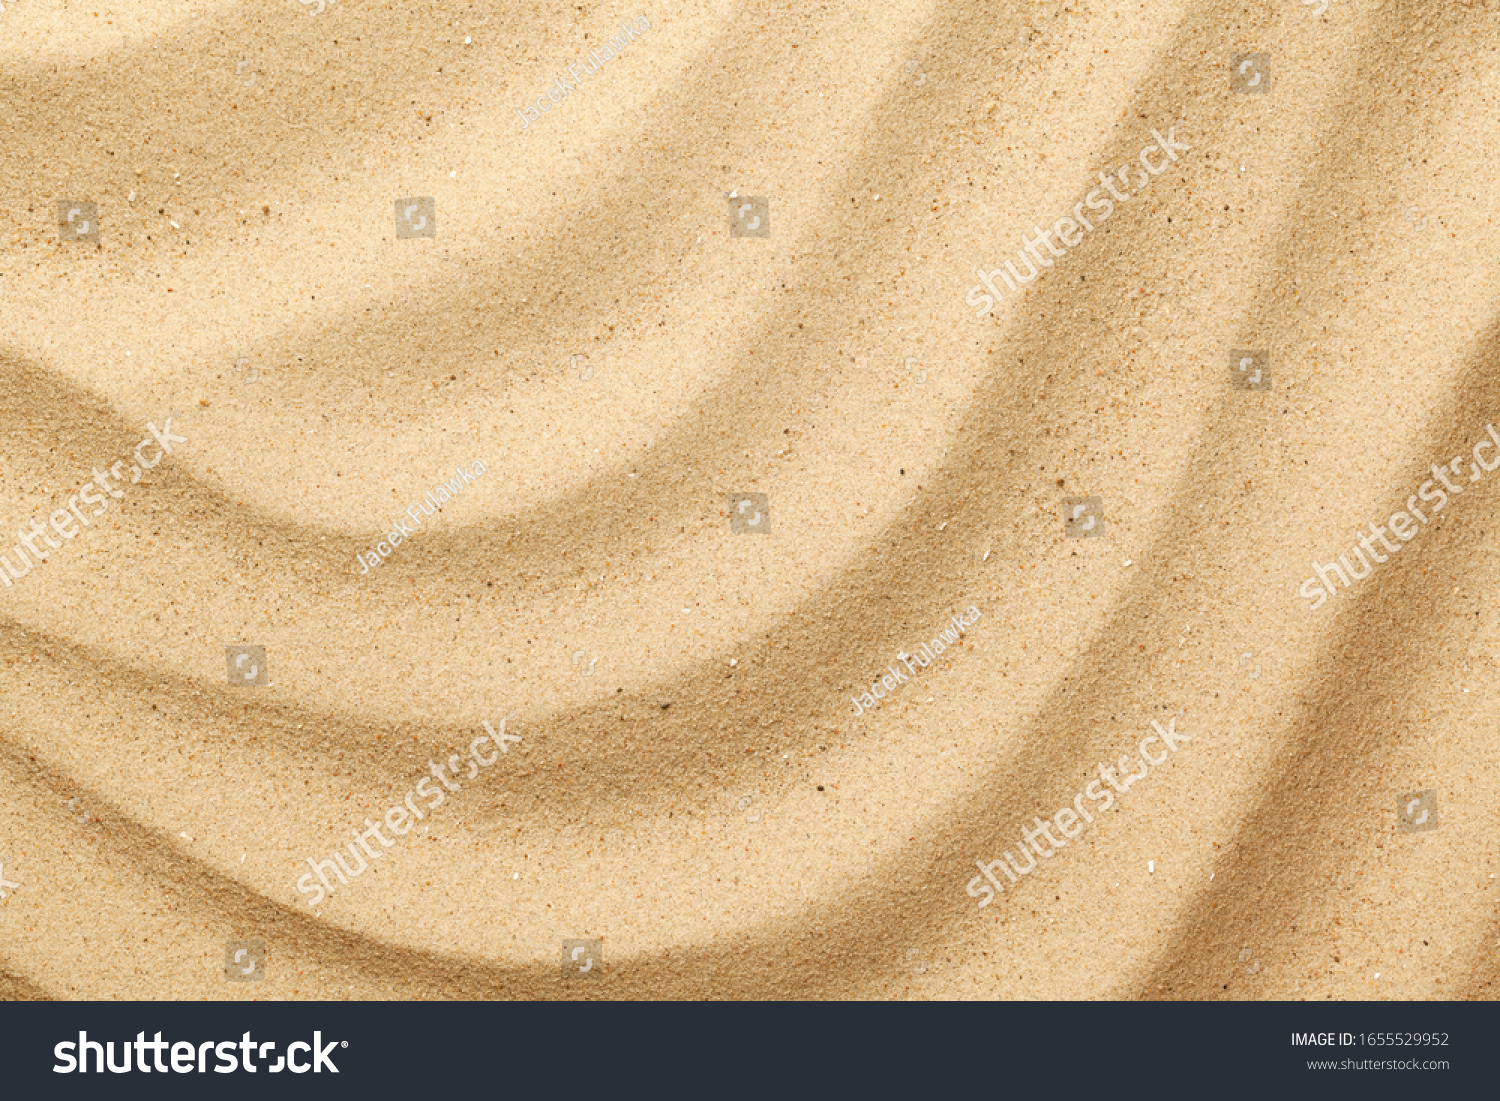 Wavy sea sand background. Flat lay. Top view #1655529952